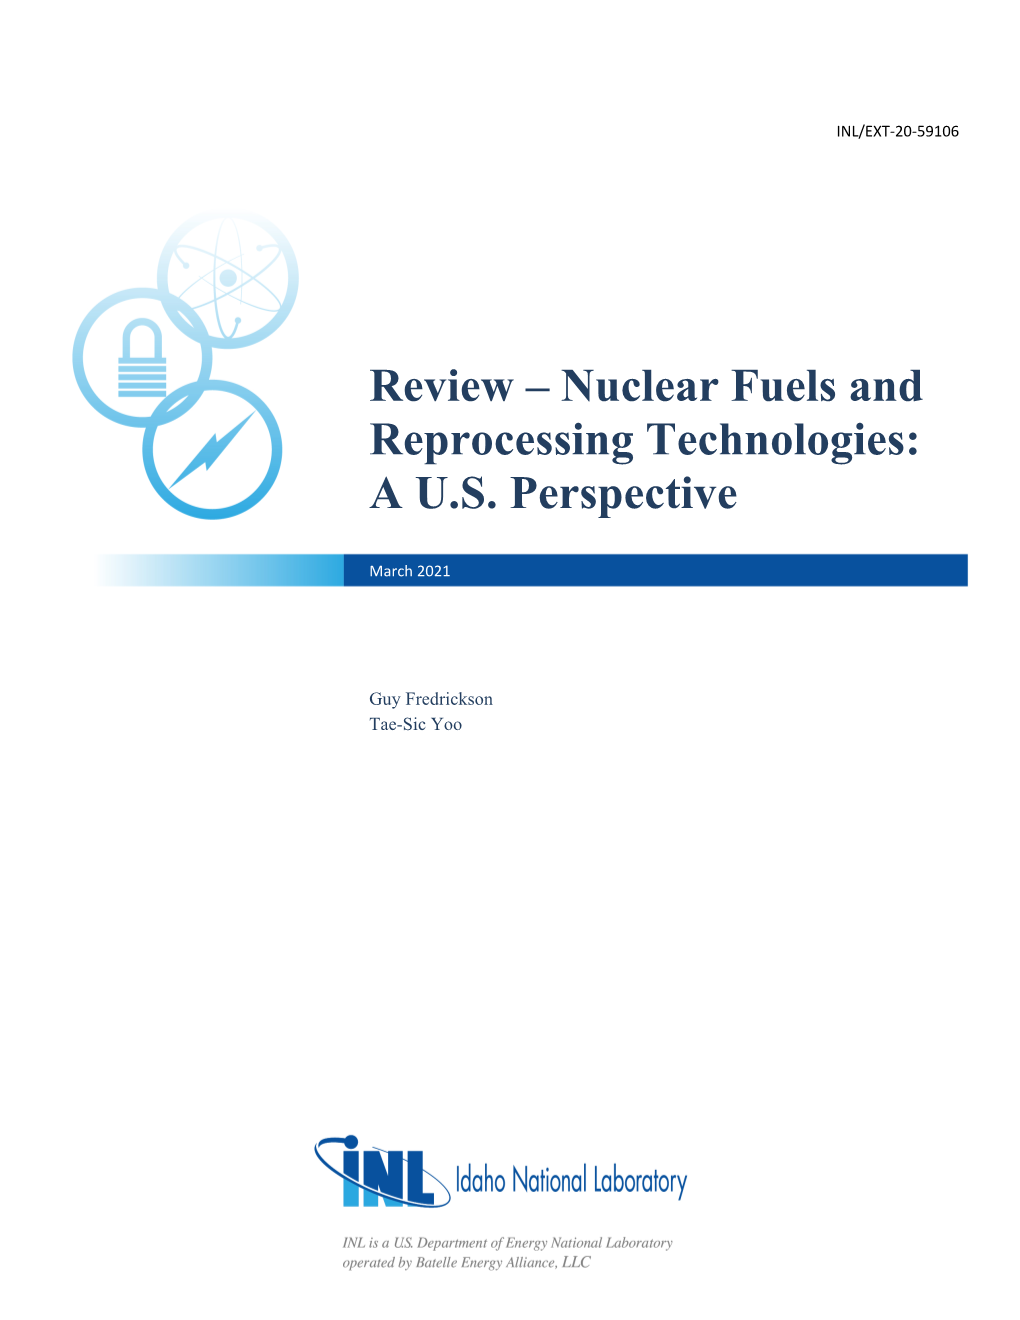 Nuclear Fuels and Reprocessing Technologies: a US Perspective